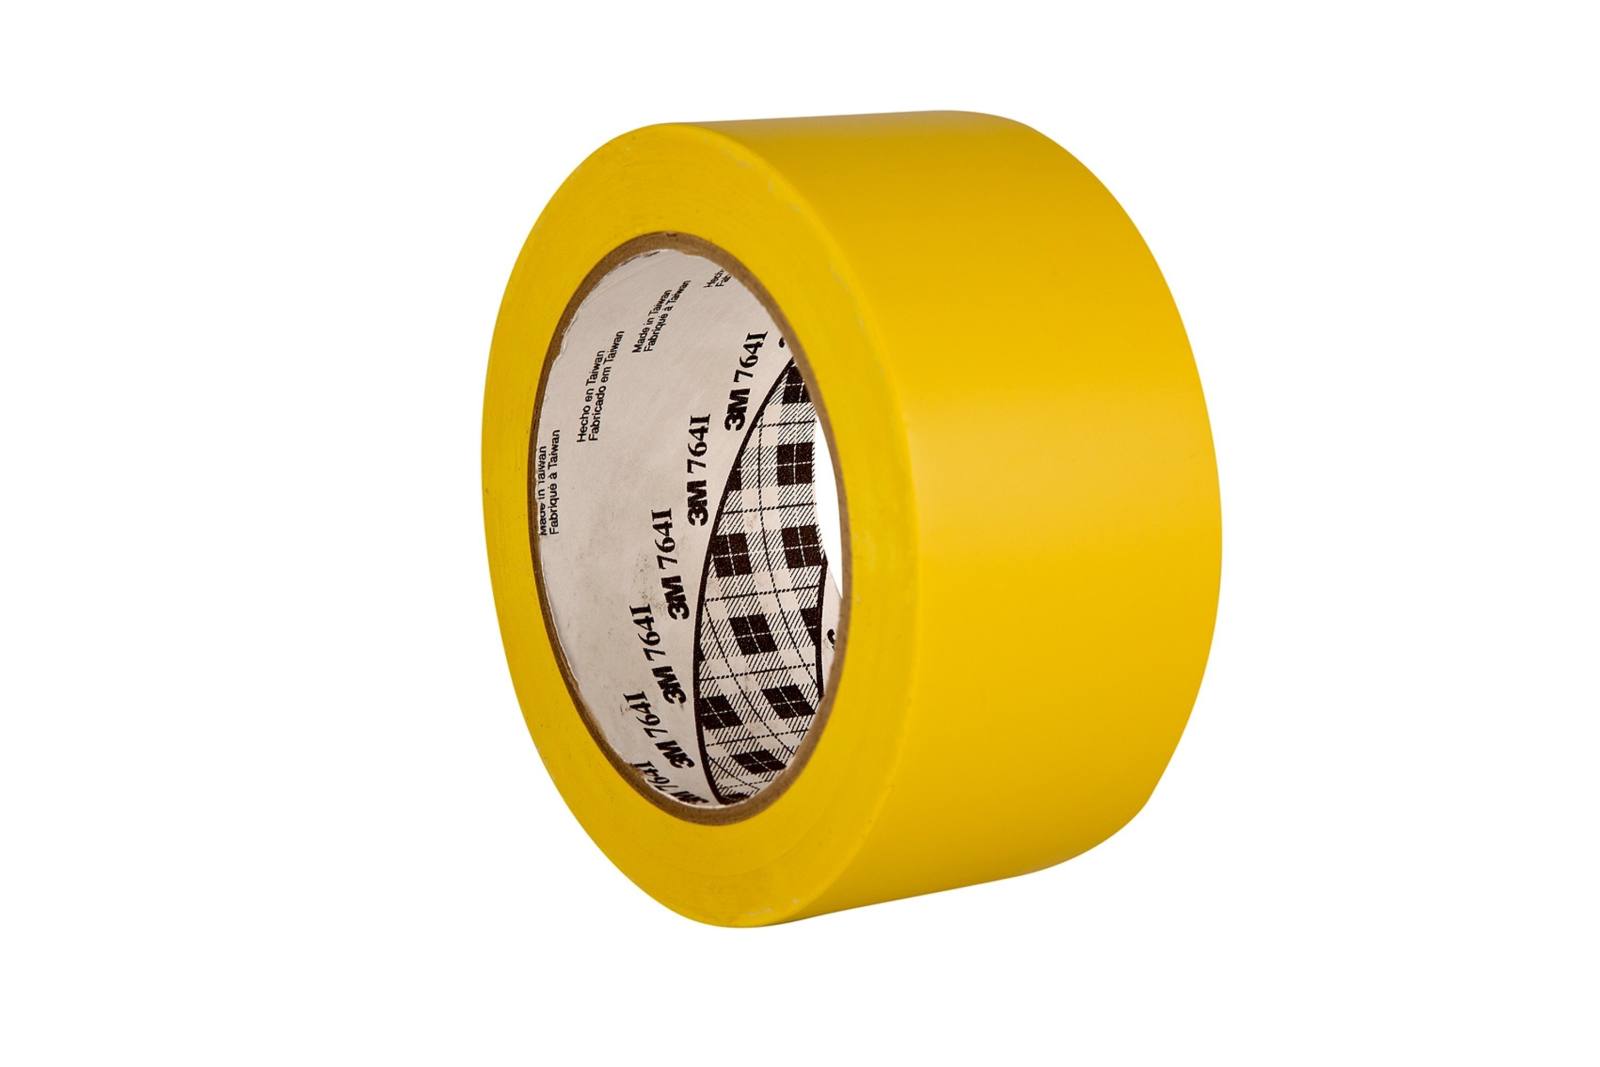 3M All-purpose PVC adhesive tape 764, yellow, 50 mm x 33 m, individually packed for convenience